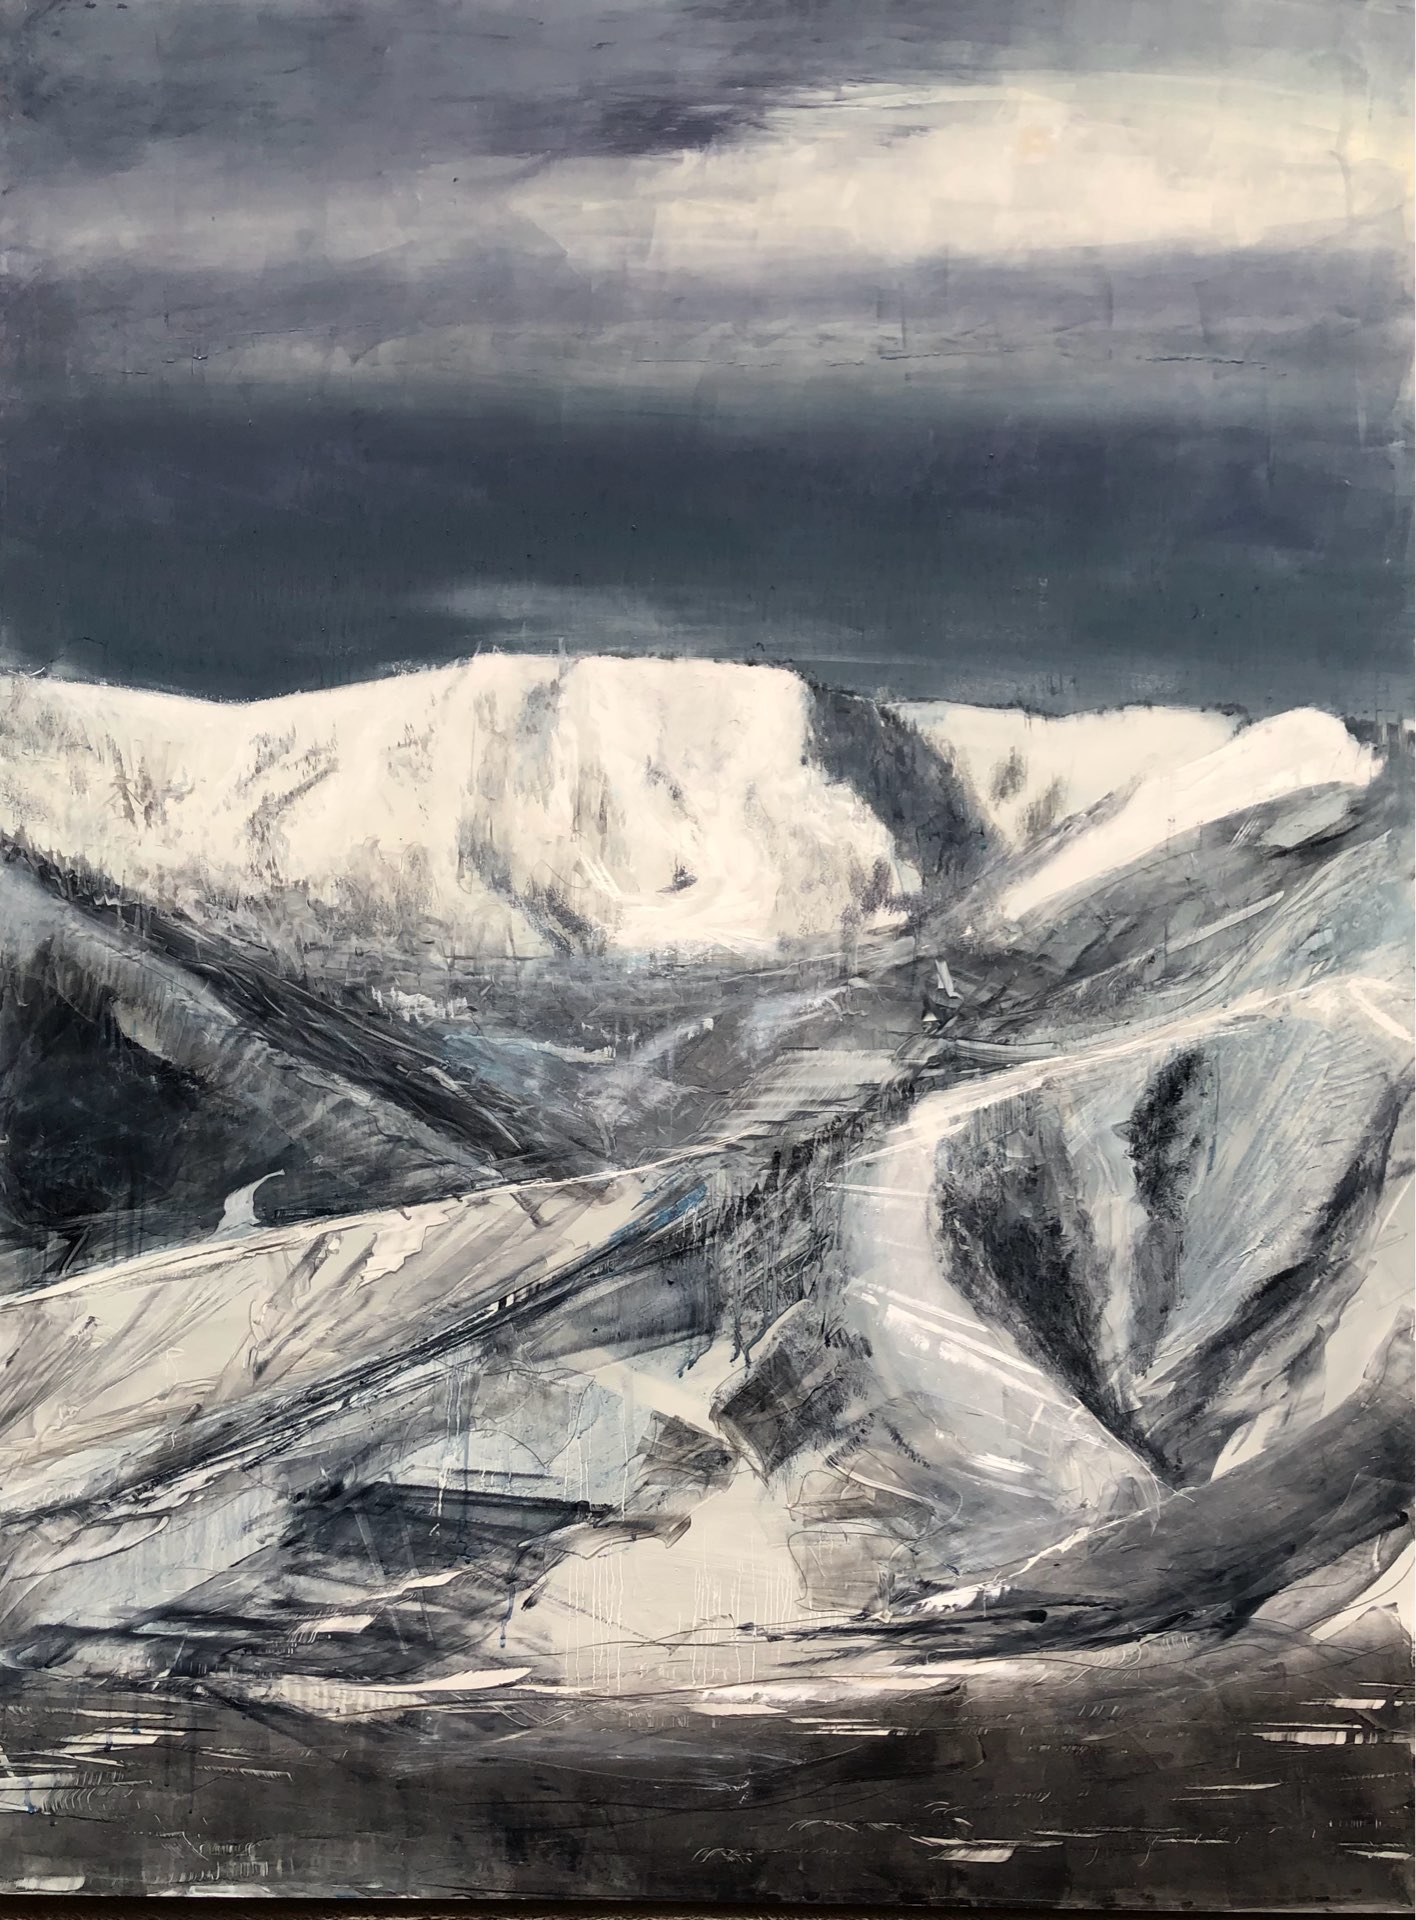 Snow Day, Contemporary oil painting on metal of Square Top mountain a favorite Utah ski area, Fine Art by Cynthia McLoughlin